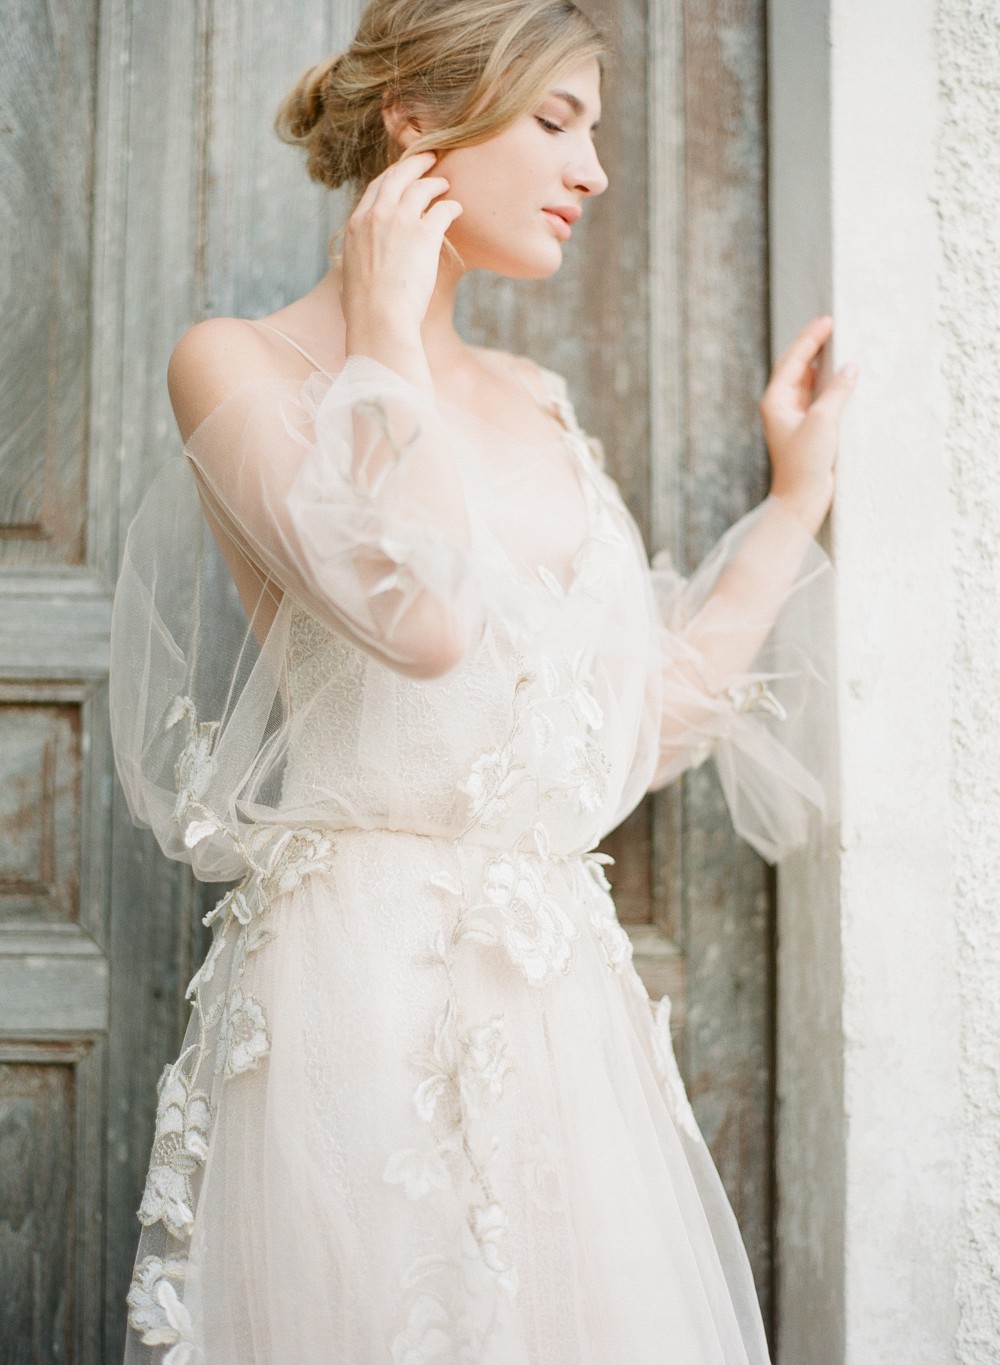 Angelic Bridal Session in Greece